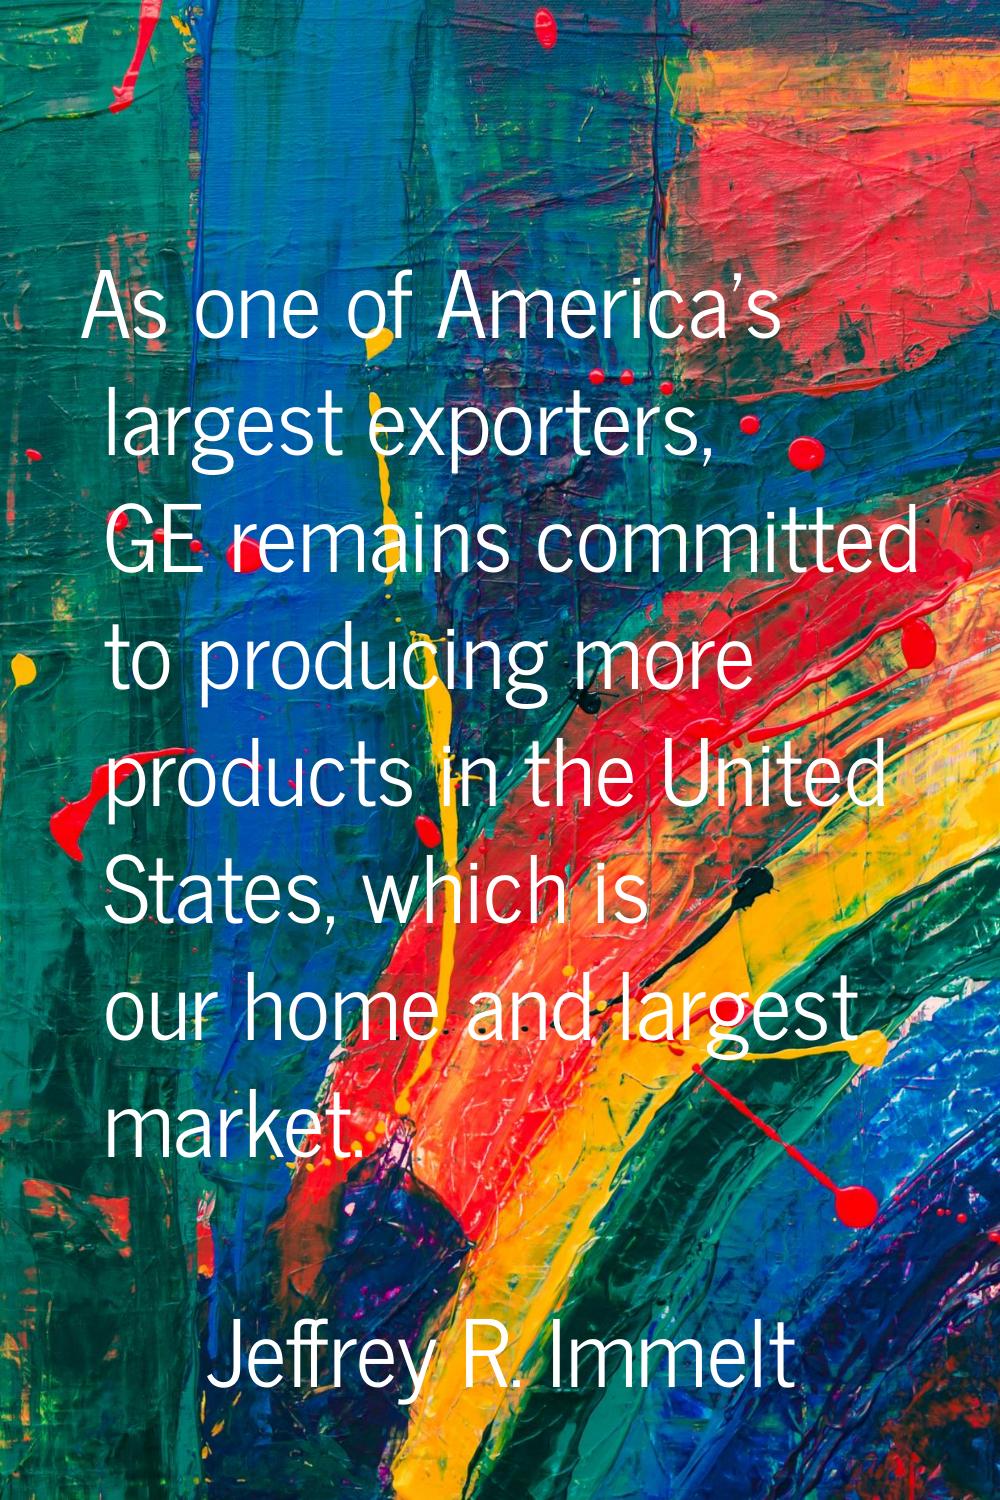 As one of America's largest exporters, GE remains committed to producing more products in the Unite